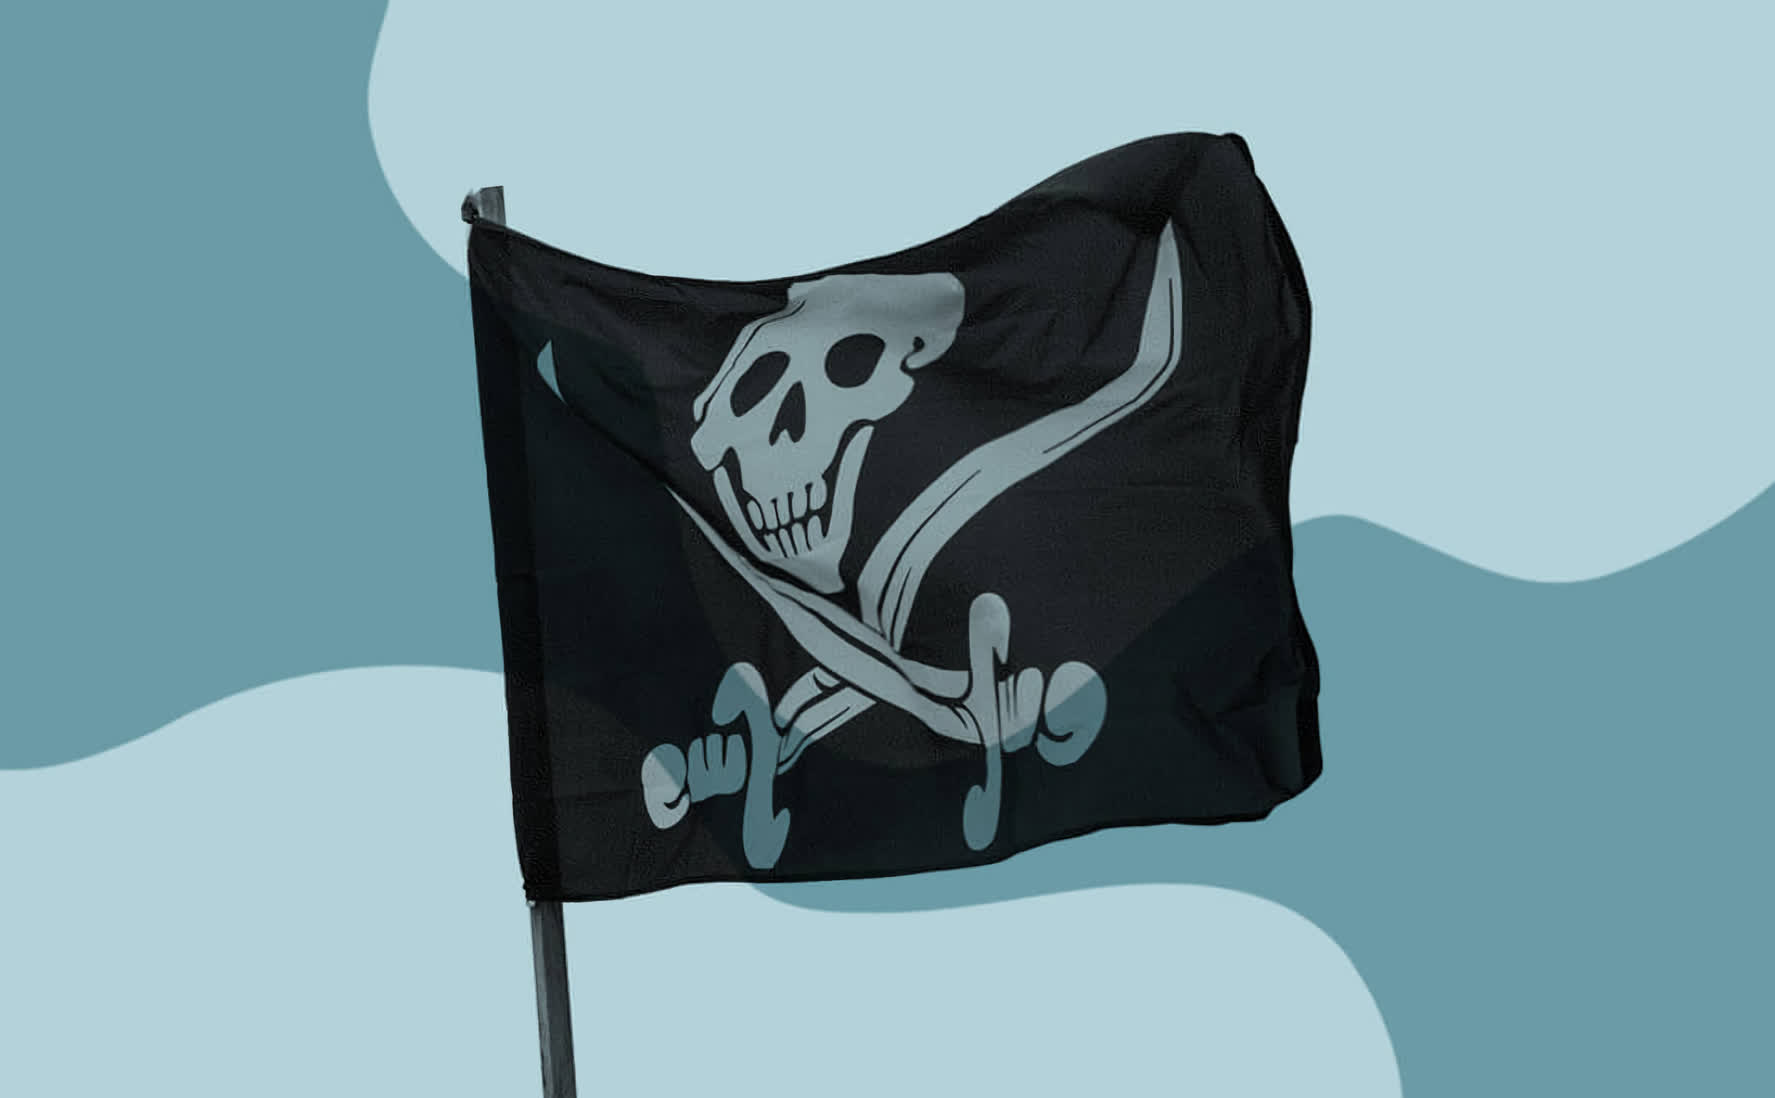 Online piracy is on the rise, with television and movies leading the charge